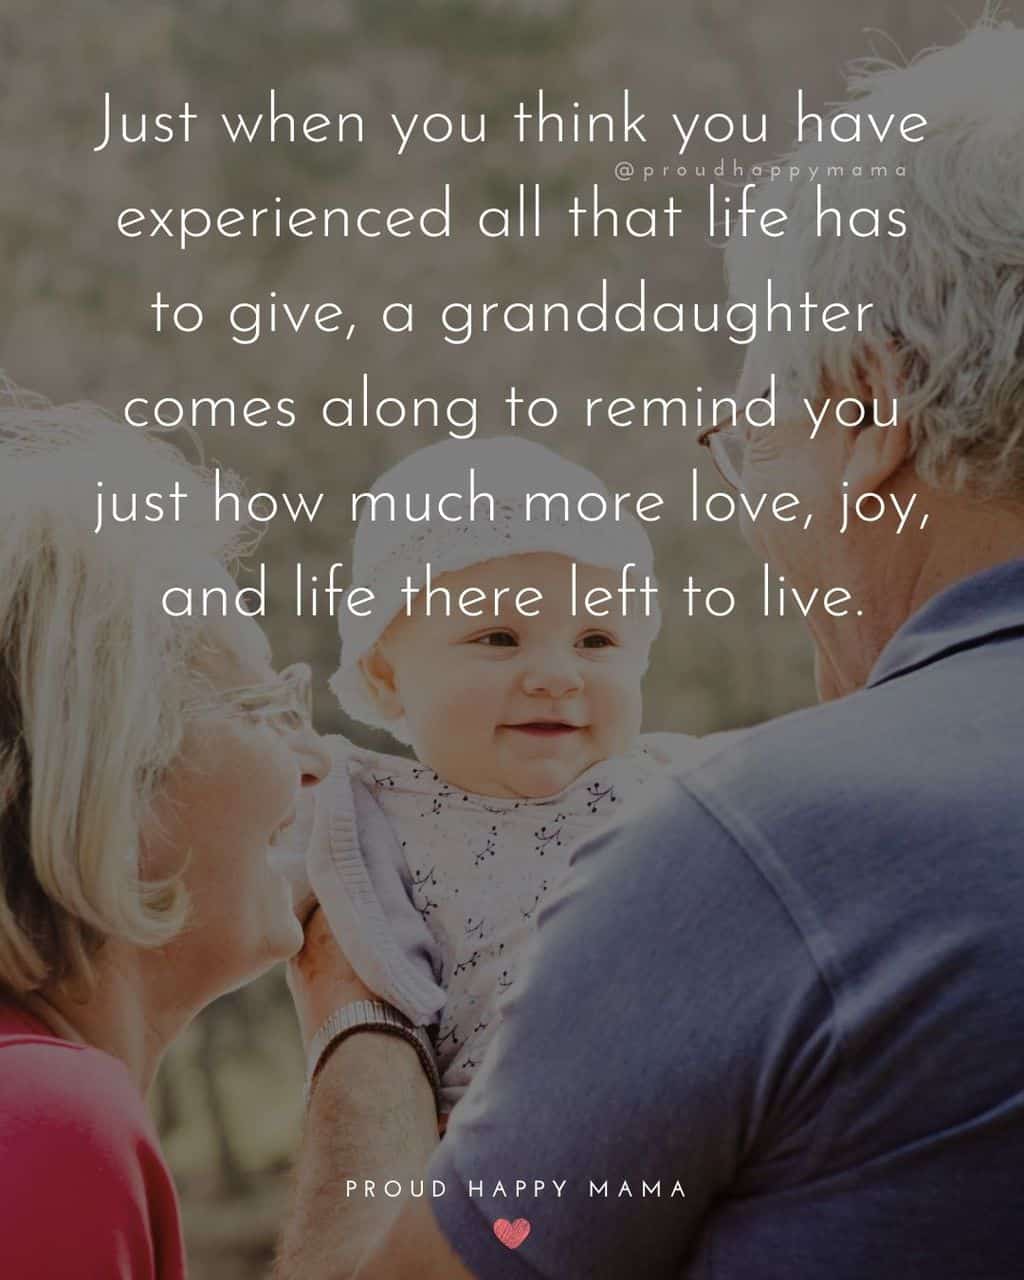 Granddaughter Quotes - Just when you think you have experienced all that life has to give, a granddaughter comes along to remind you just how much more love, joy, and life there left to live.